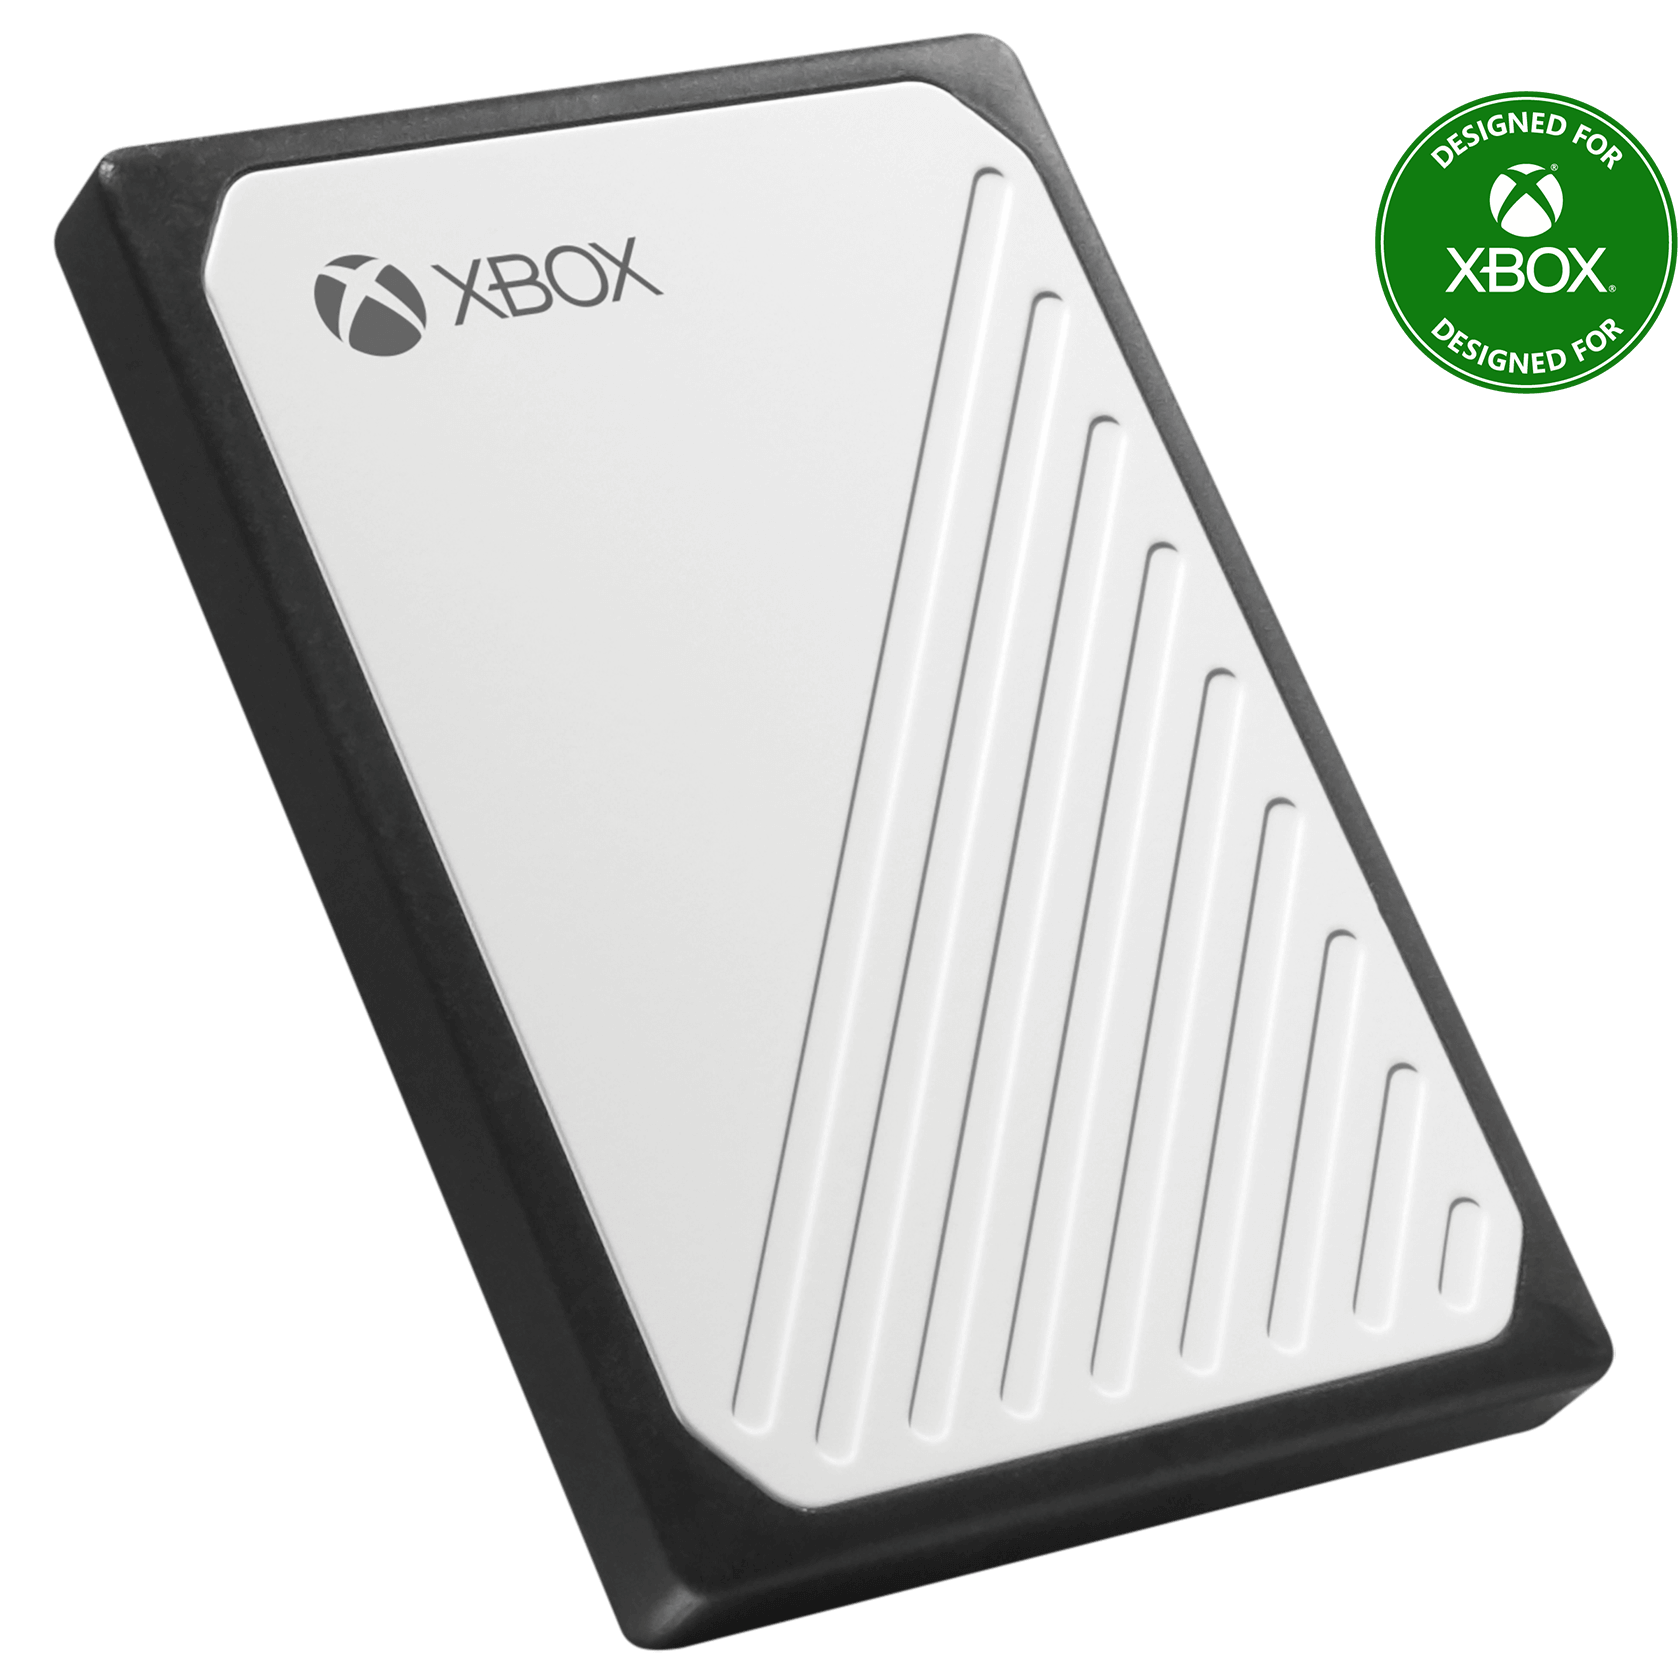 WD 500GB Gaming Drive Accelerated for Xbox One™ - WDBA4V5000AWB-WESN